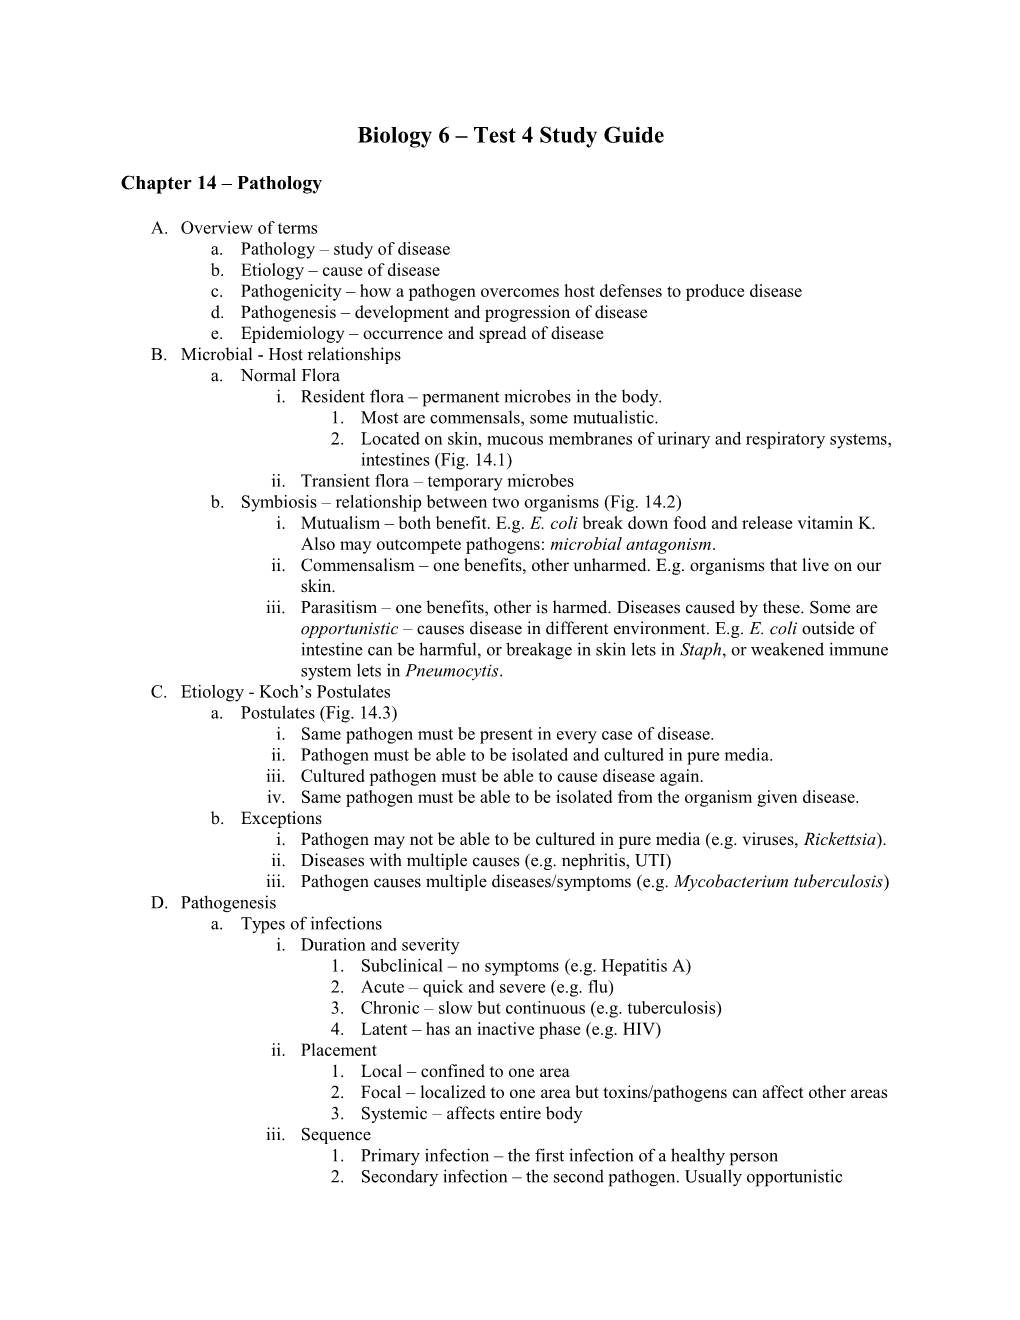 Biology 6 Test 3 Study Guide